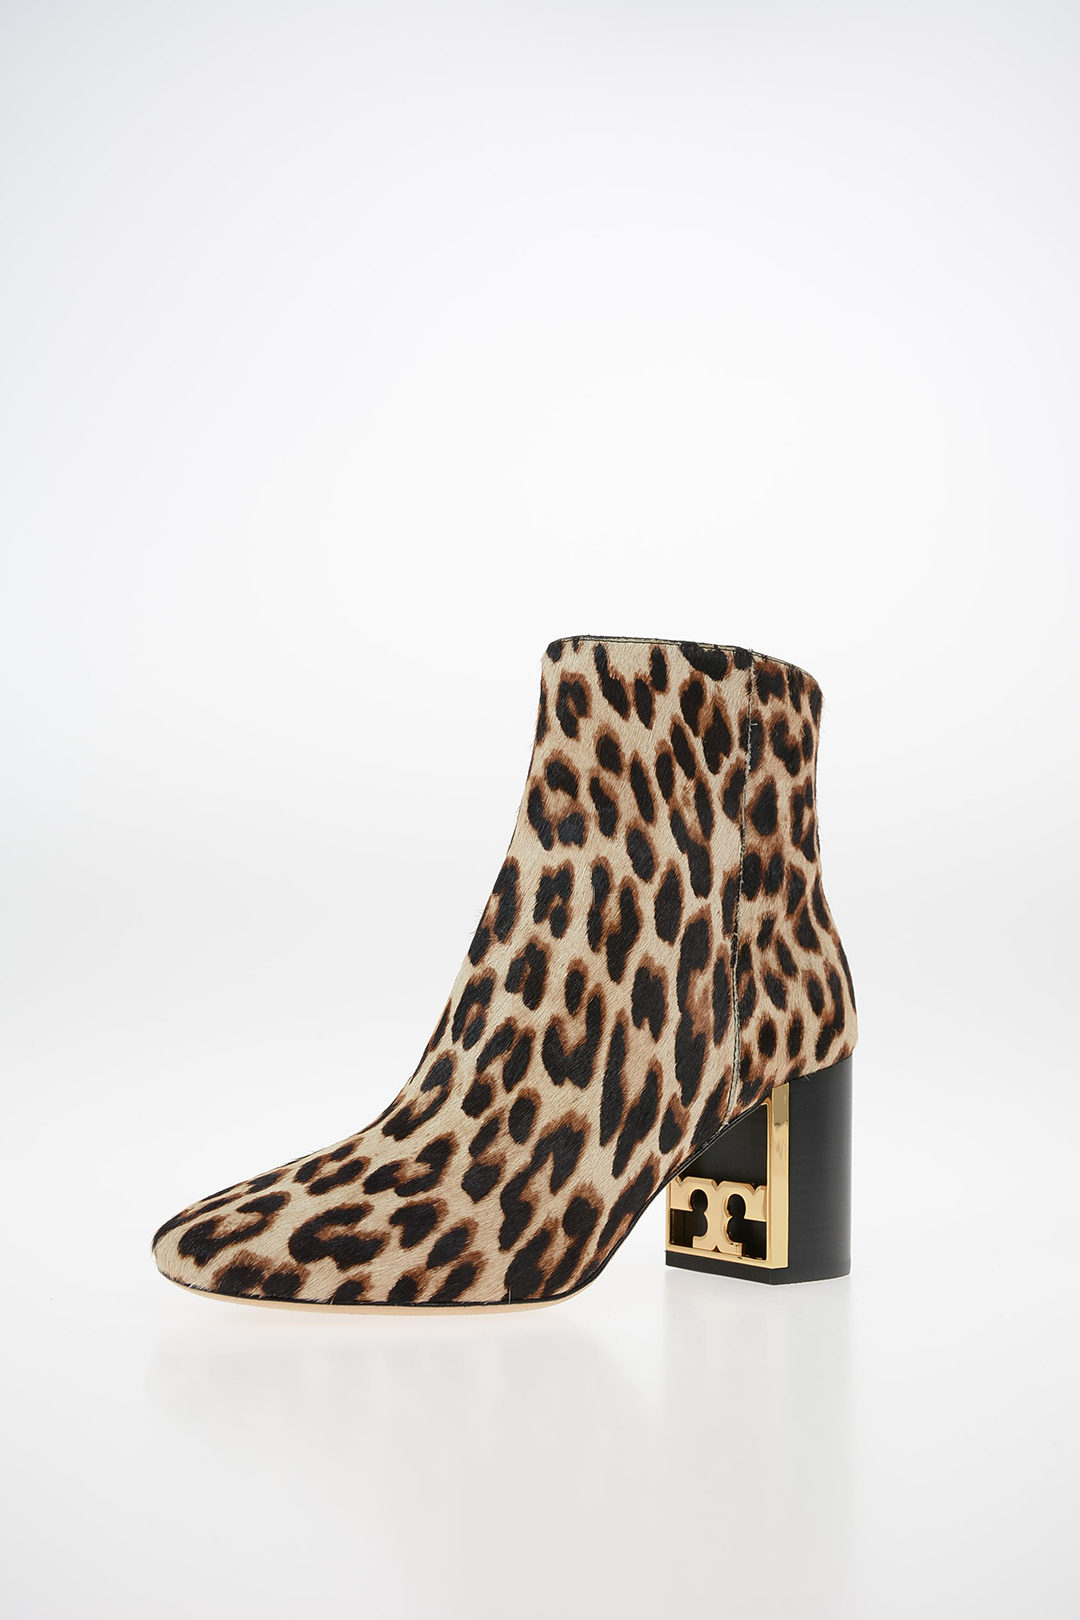 Tory Burch 7cm Leopard Printed GIGI Ankle Boot women - Glamood Outlet